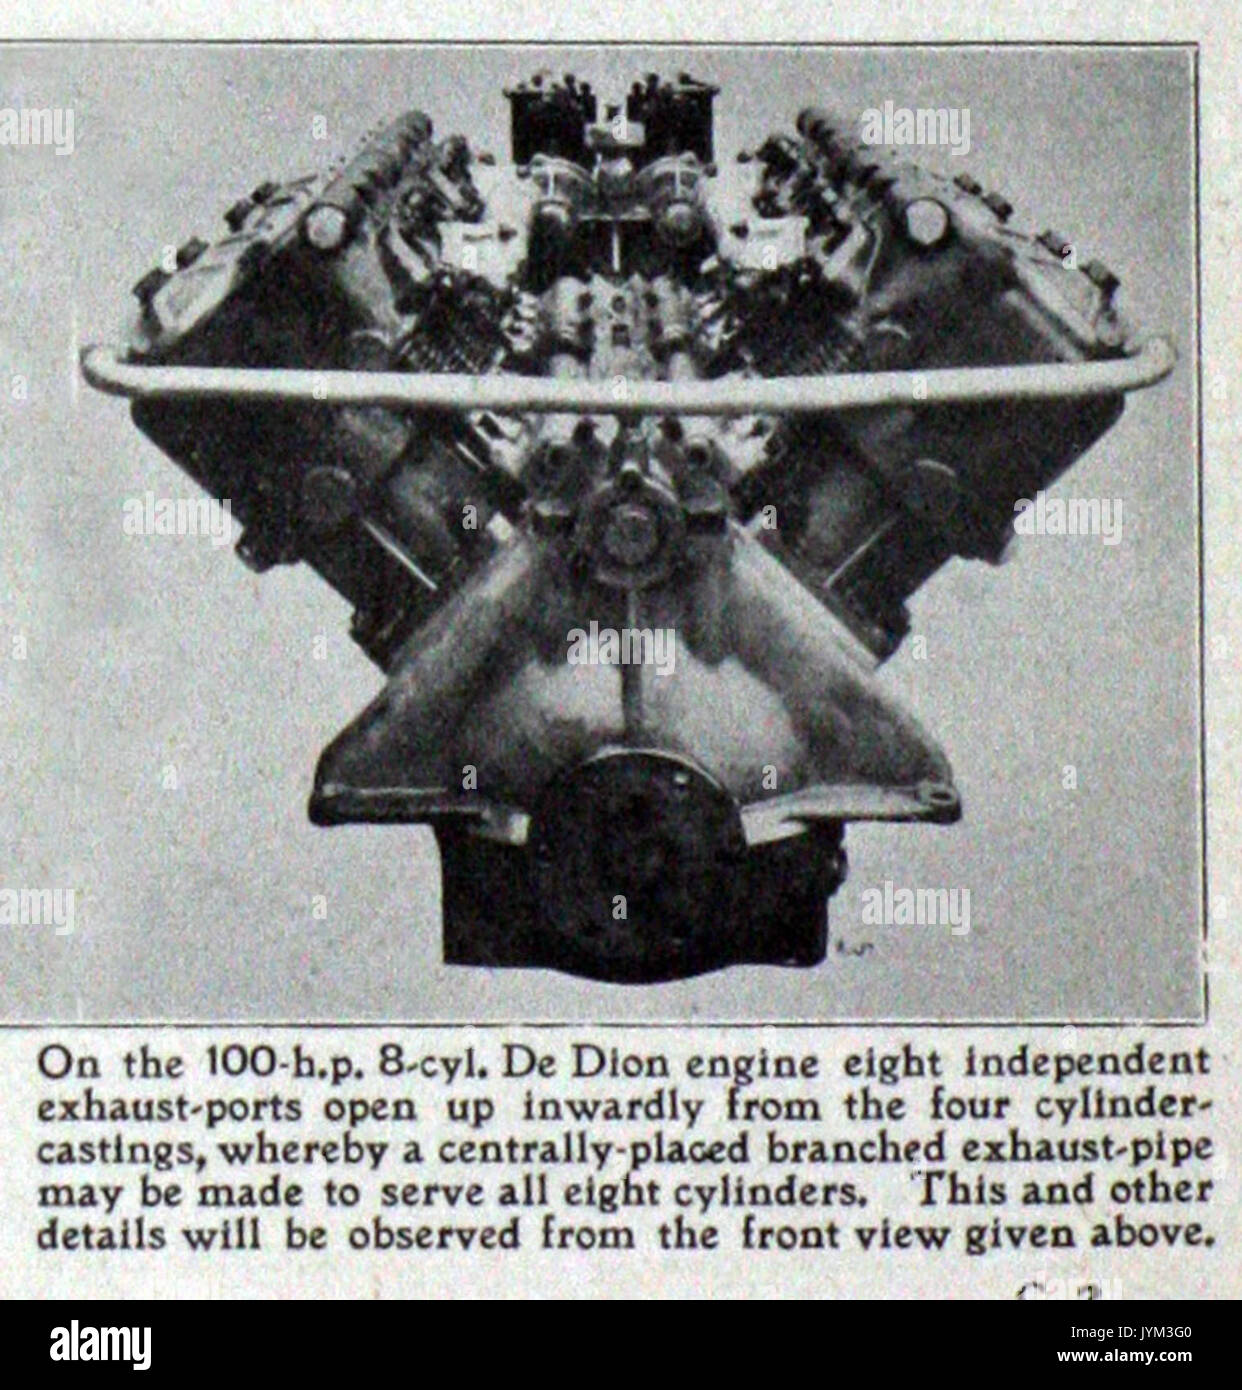 1909 De Dion Bouton 100 HP V 8 cylinder engine, front view Stock Photo -  Alamy